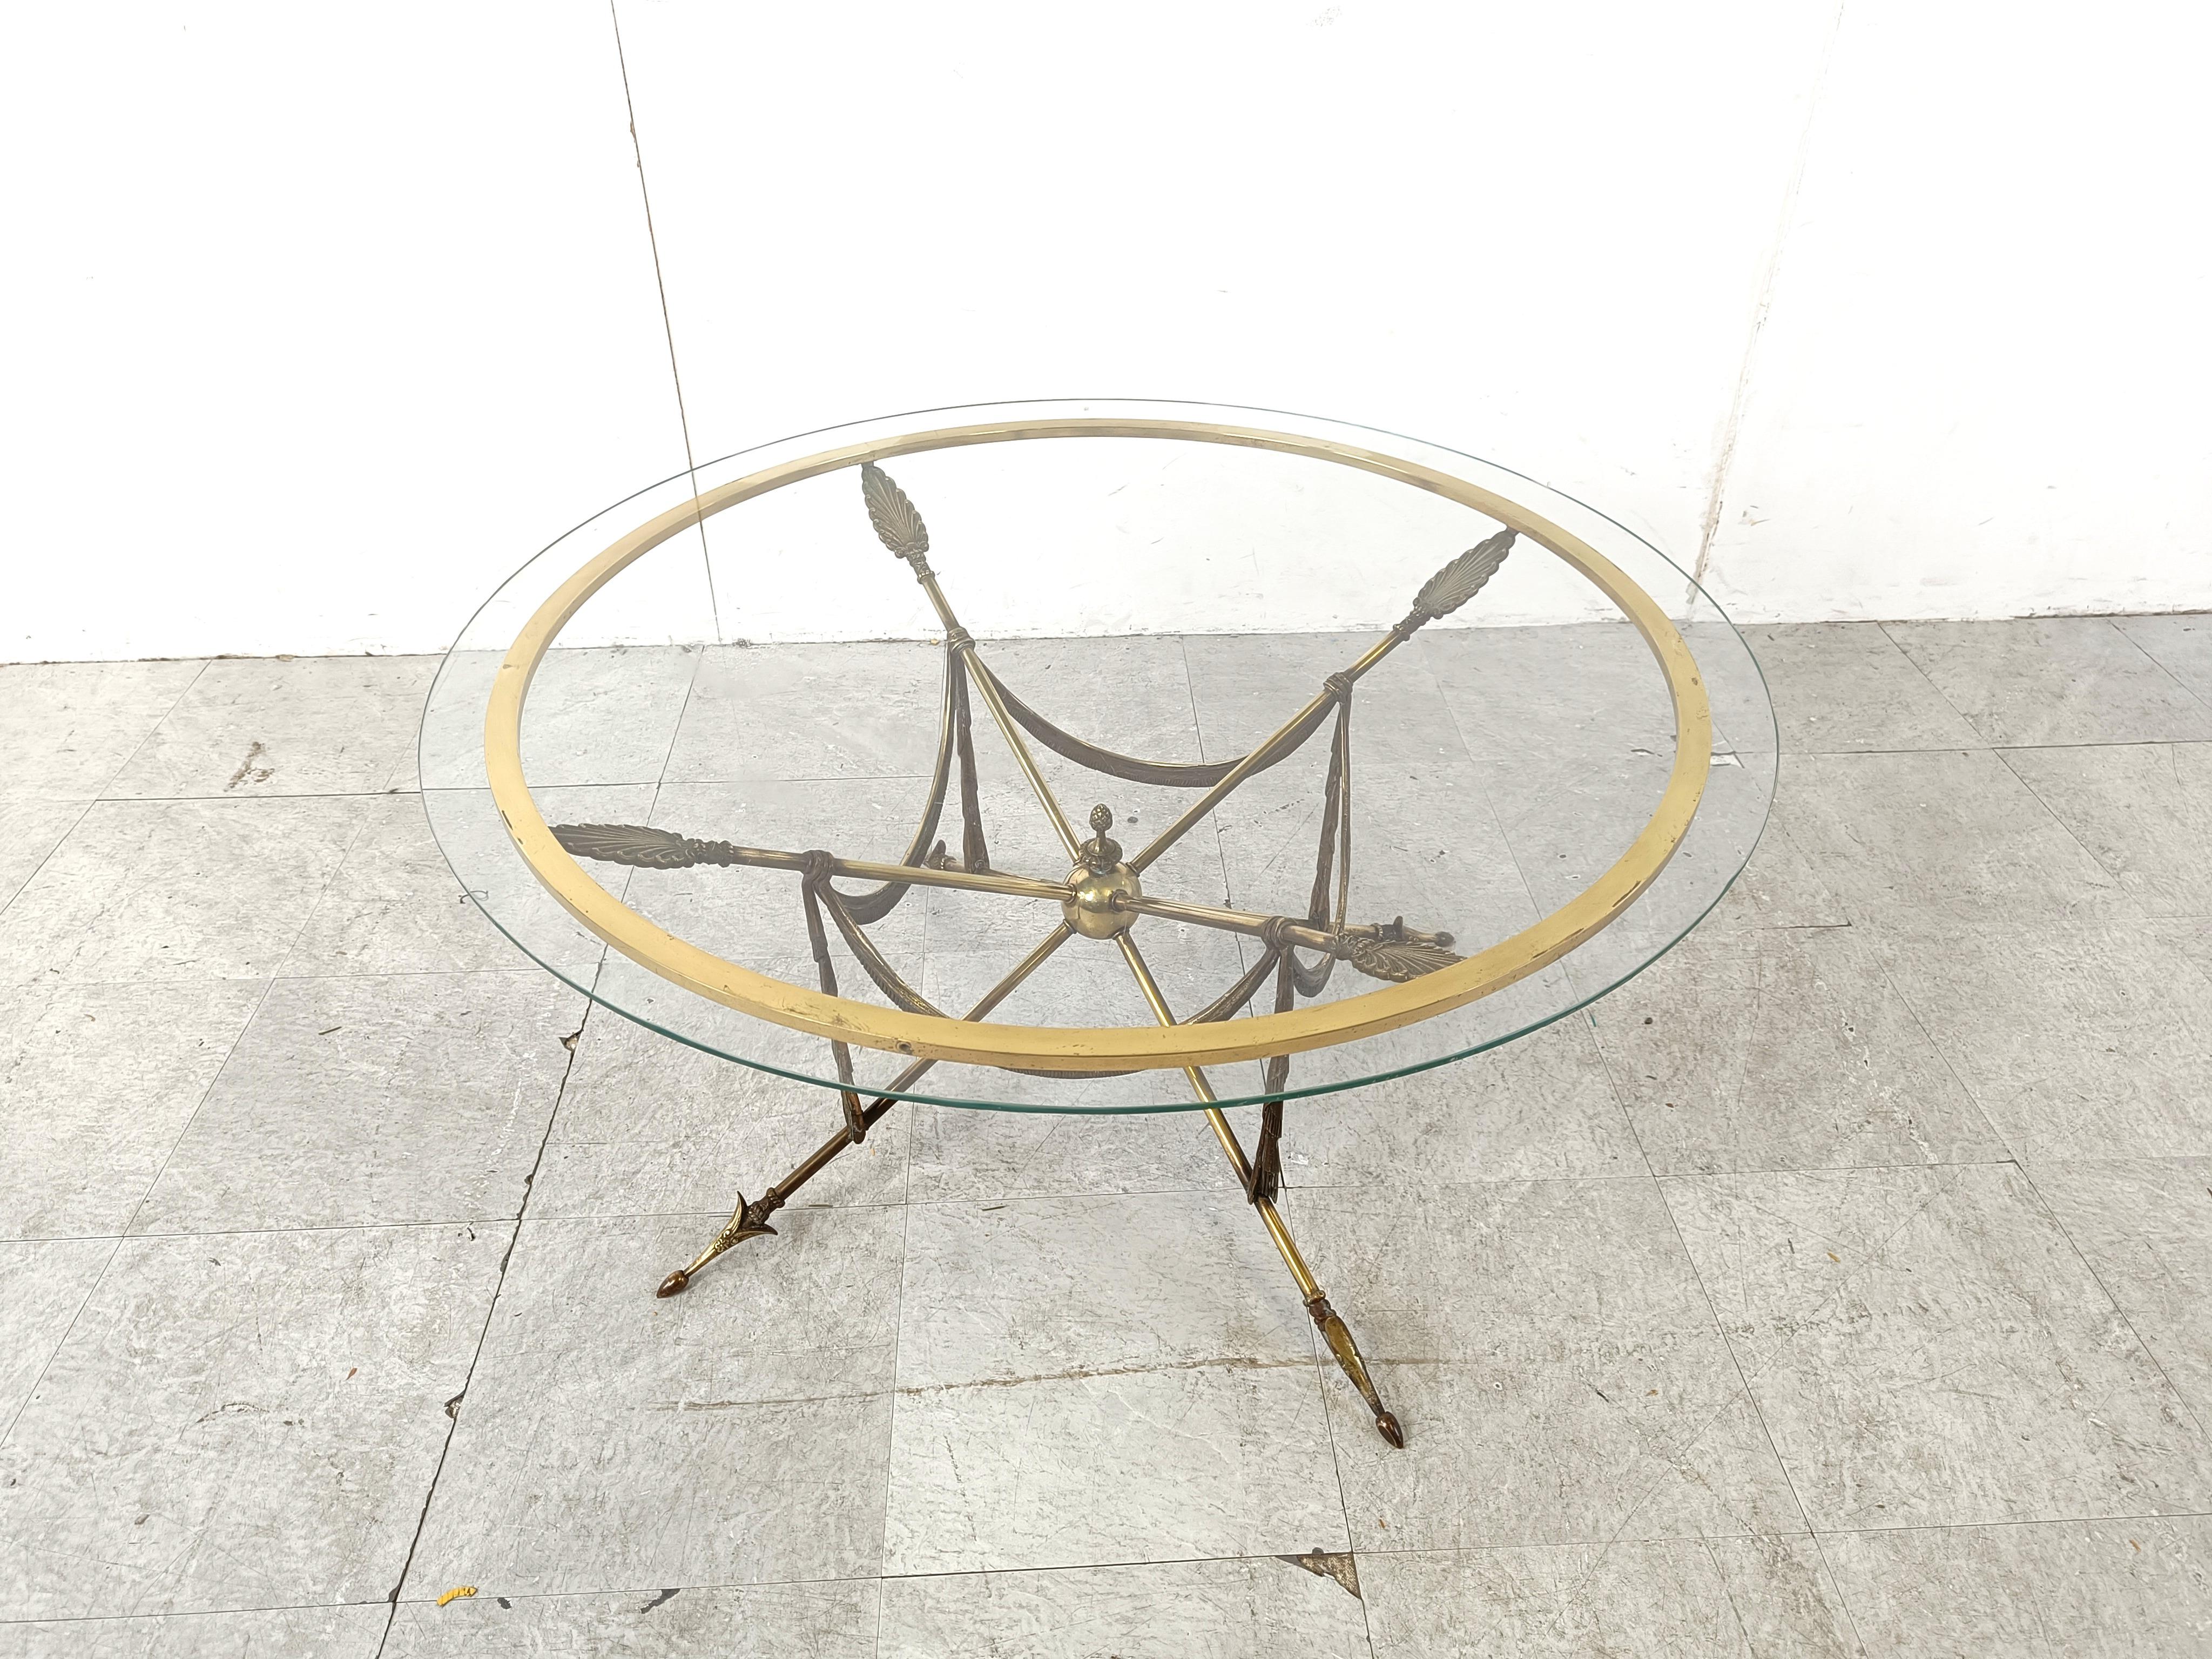 Striking vintage coffee table with brass arrows and tassel shapes with a clear glass top.

Very much in the style of Maison Jansen.

Beautiful neoclassical coffee table made of high quality brass.

1970s - France

Dimensions:
Height: 45cm
Width: